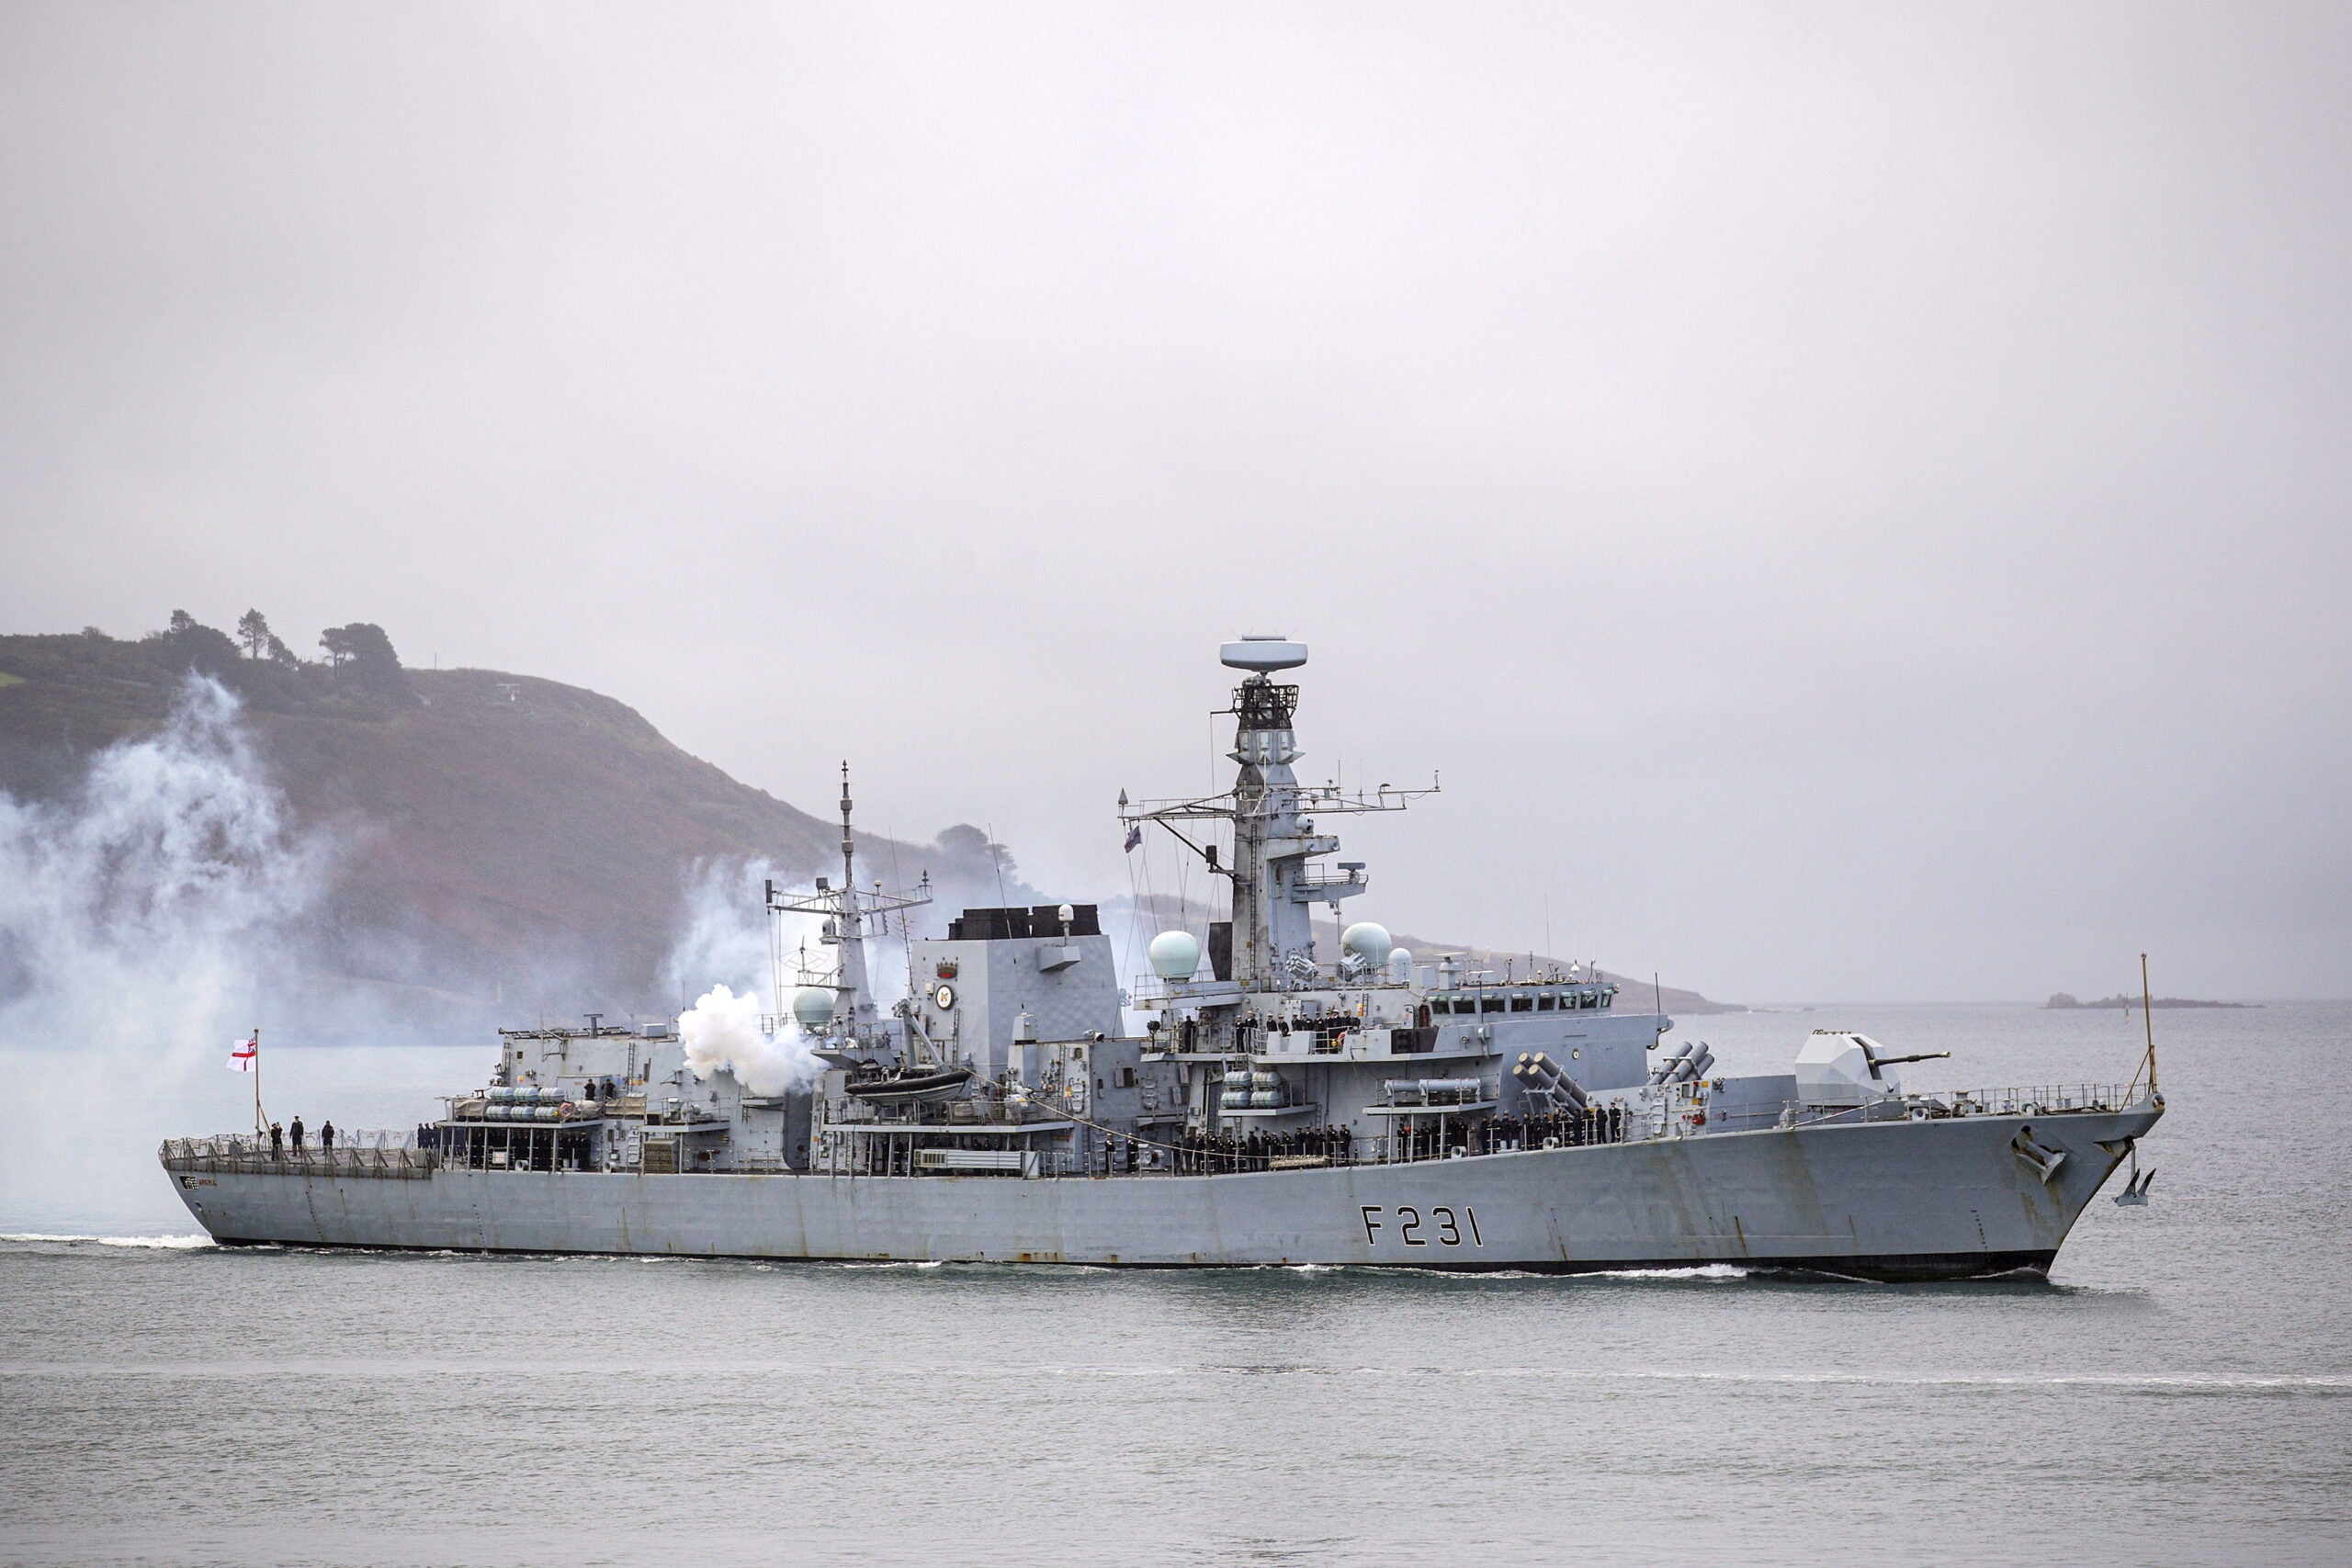 Pictured is the Royal Navy frigate HMS Argyll, firing a salute as she returns home to Devonport after nearly six months on constant operations in the punishing Gulf heat deployed on Operation Kipion. 

Nearly six million tonnes of shipping  68 merchant vessels carrying goods, oil and natural gas  has been safely monitored through key sea lanes in the Middle East since the Plymouth-based ship arrived in the region in April 2020.

HMS Argyll is the longest serving Type 23 Frigate in the Royal Navy, but an extensive refit and capability upgrade saw her emerge in 2017 as one of the most technologically capable Frigates in the Royal Navy.

HMS Argylls Motto is  Ne Obliviscarus (Lest we forget)